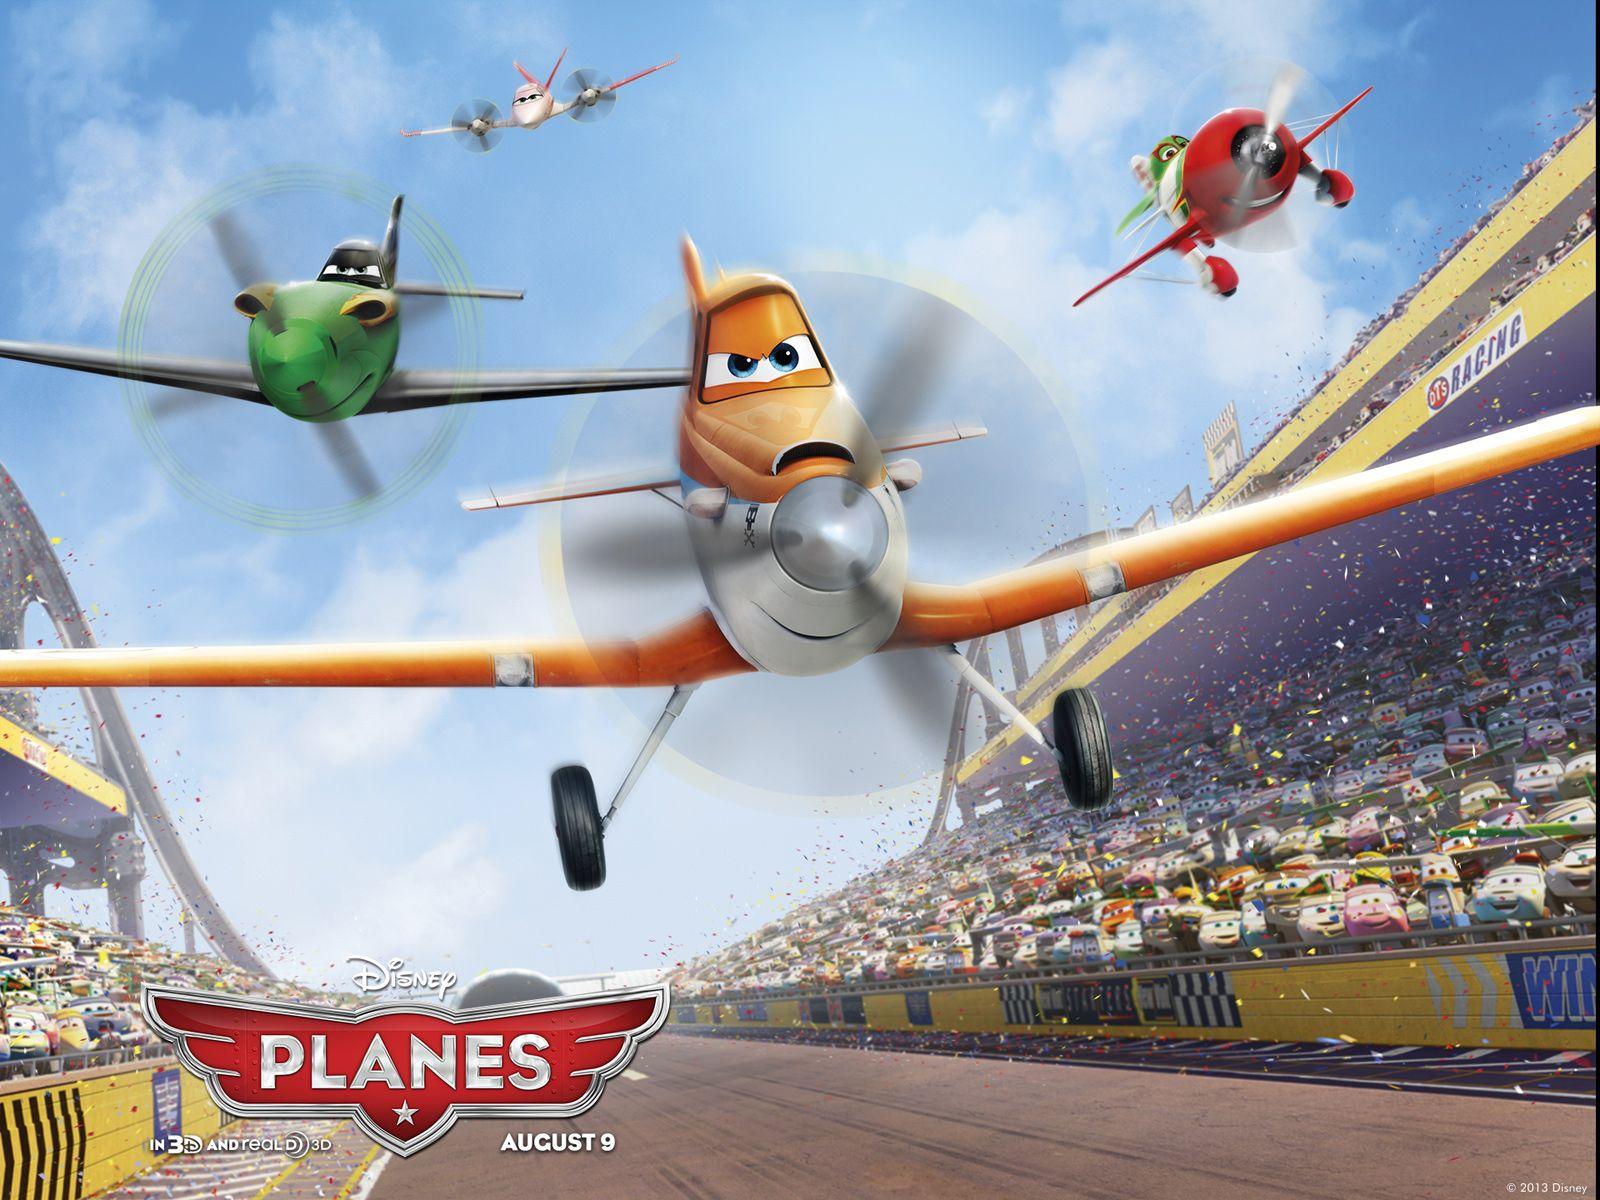 Disney Planes Movie Logo - Review} Disney's Planes in 3D Takes Off with Young Viewers